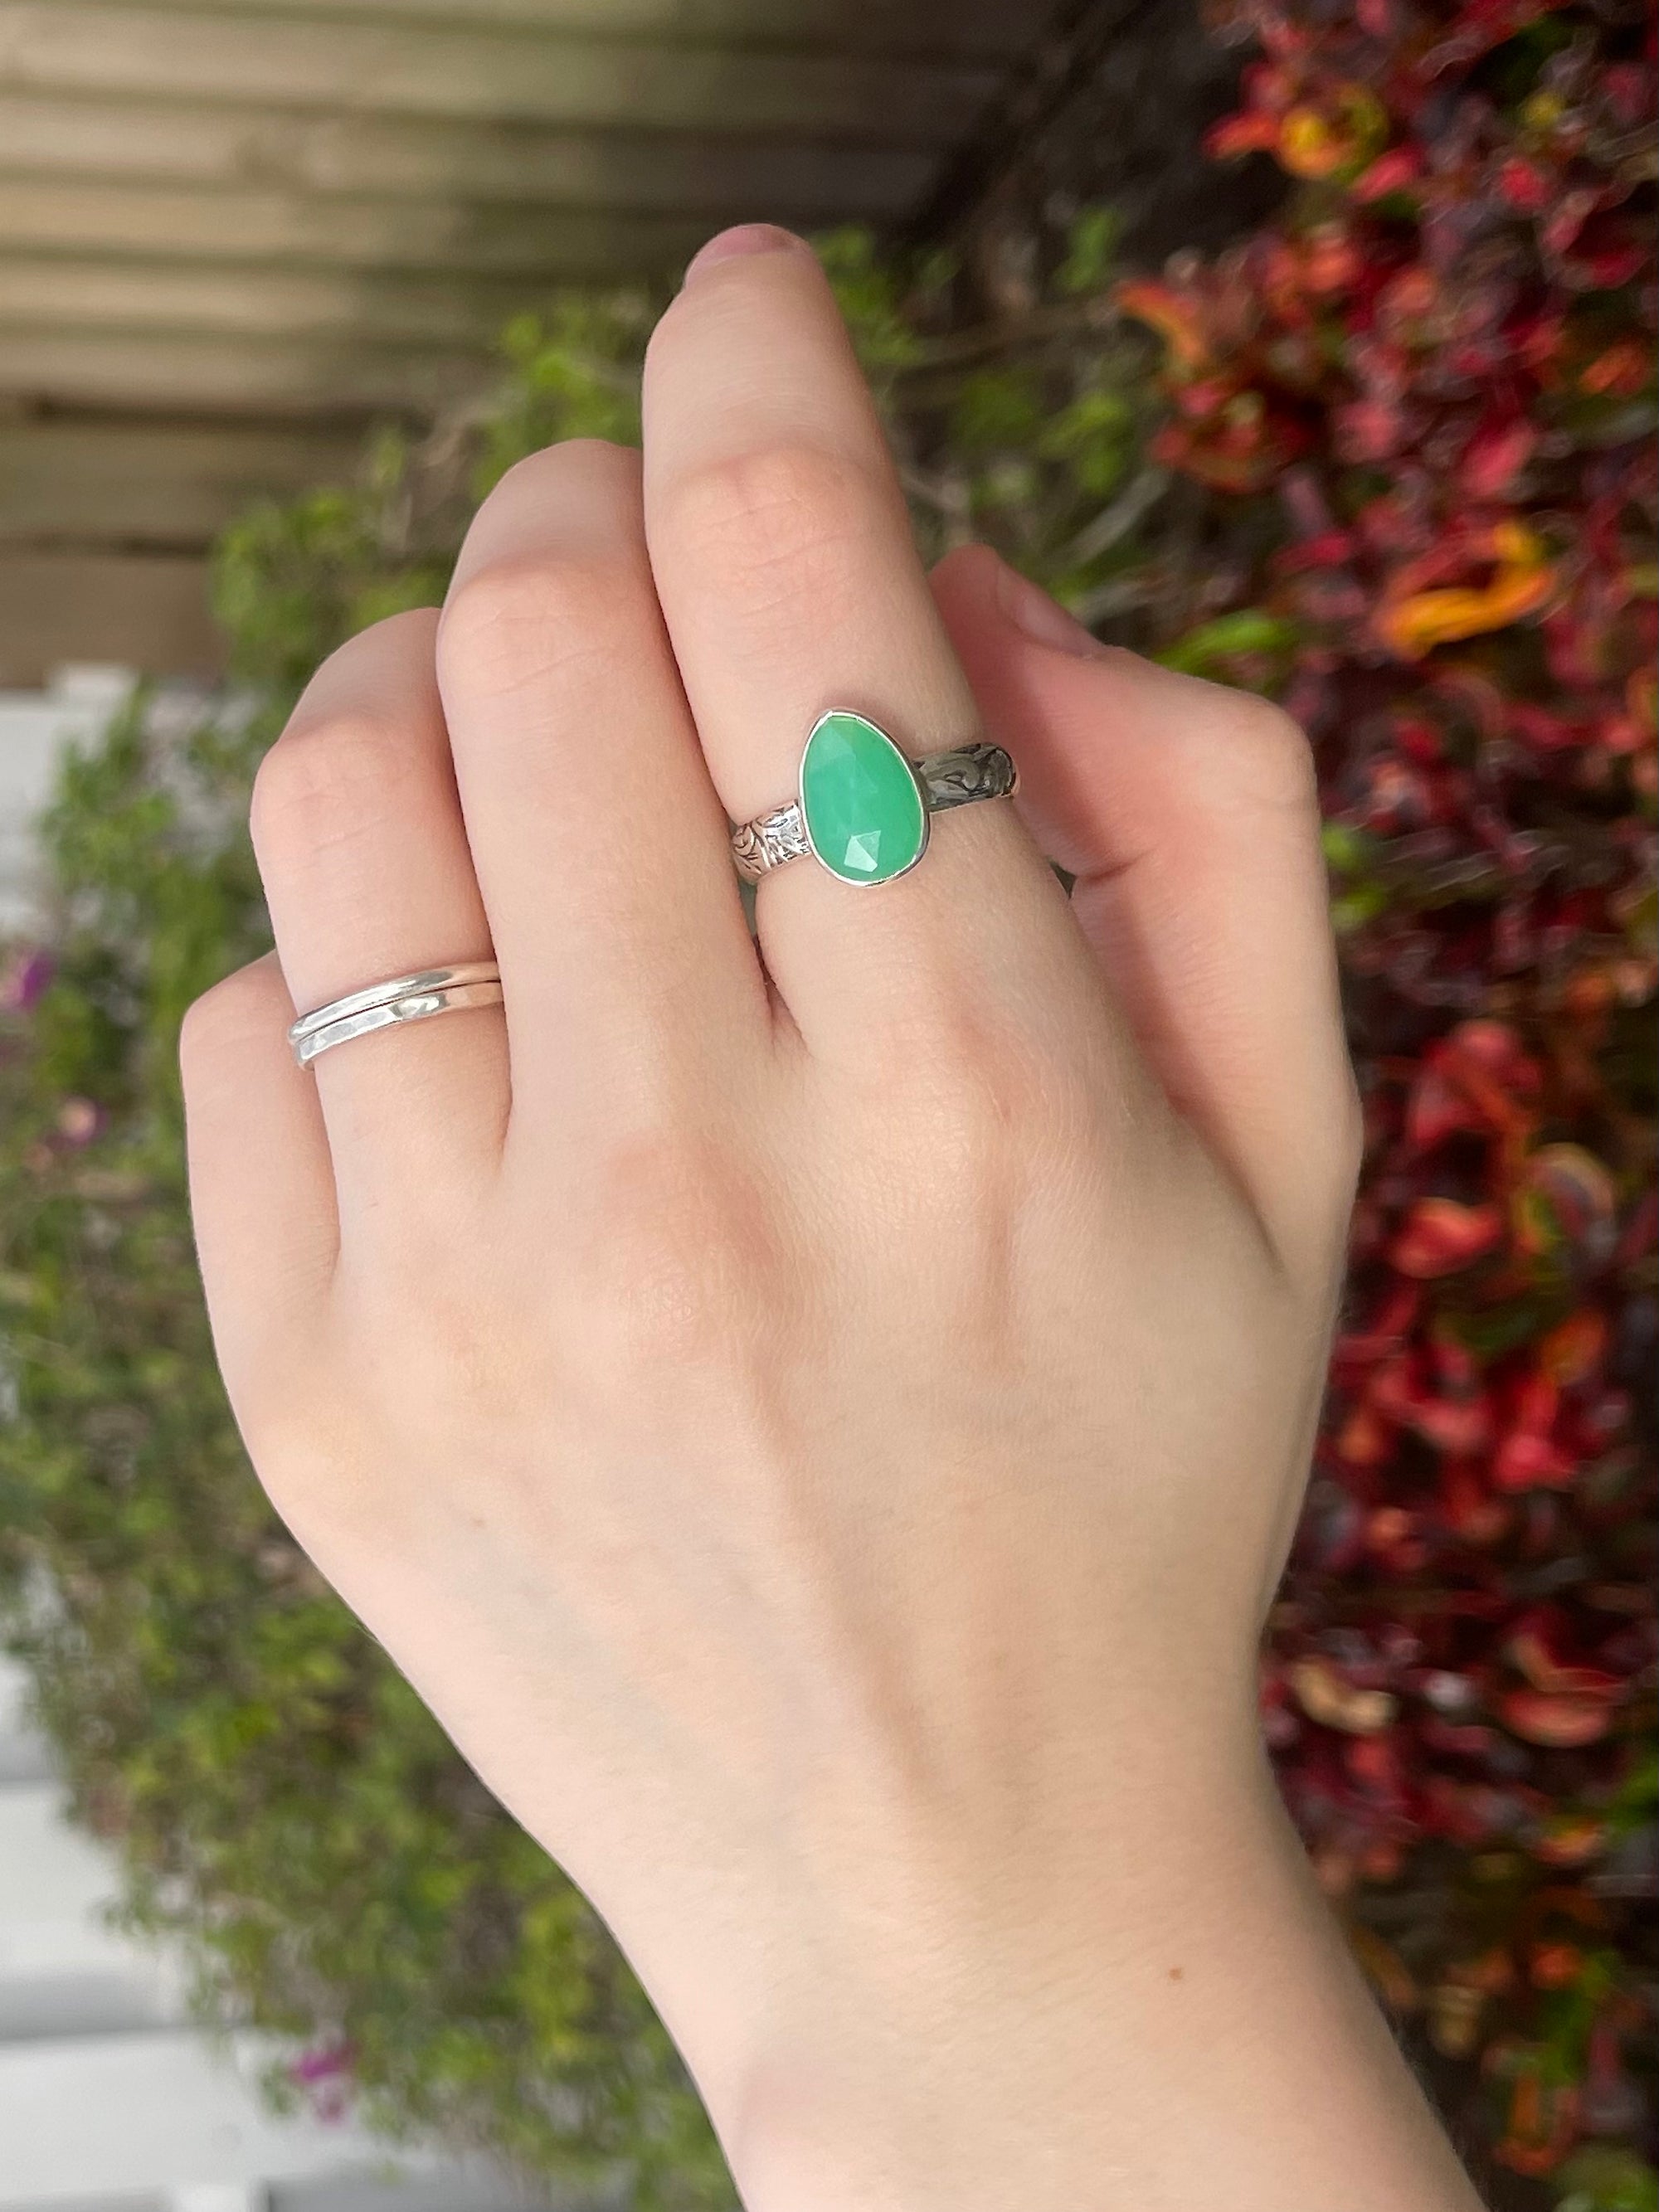 handmade sterling silver faceted chrysoprase stone ring size 8.75